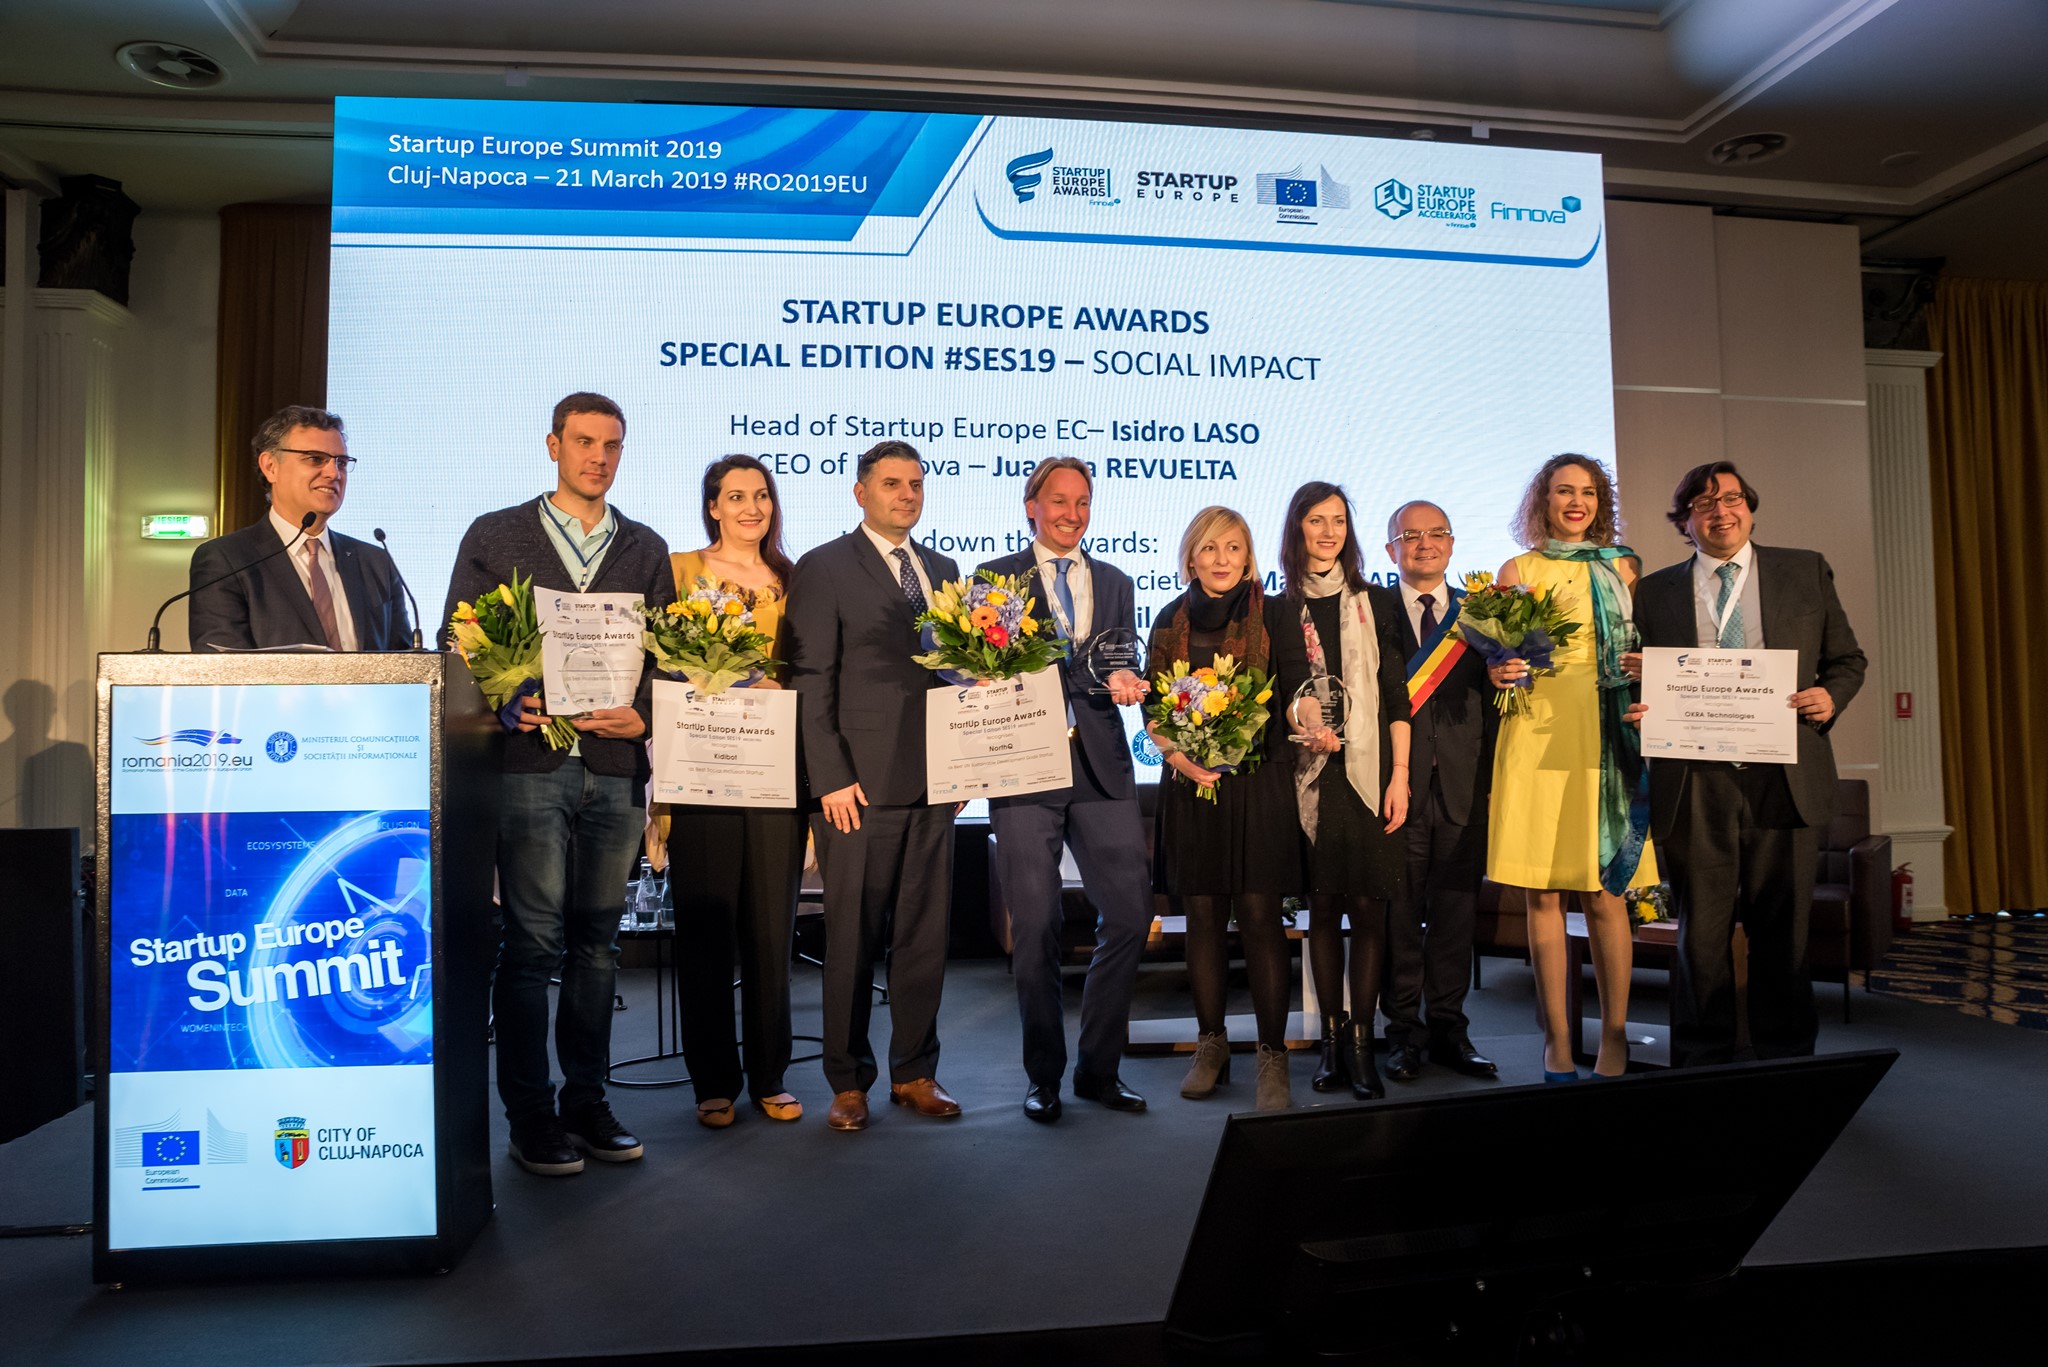 StartUp Europe Awards recognizes the best 5 startups in a special edition focused on social impact